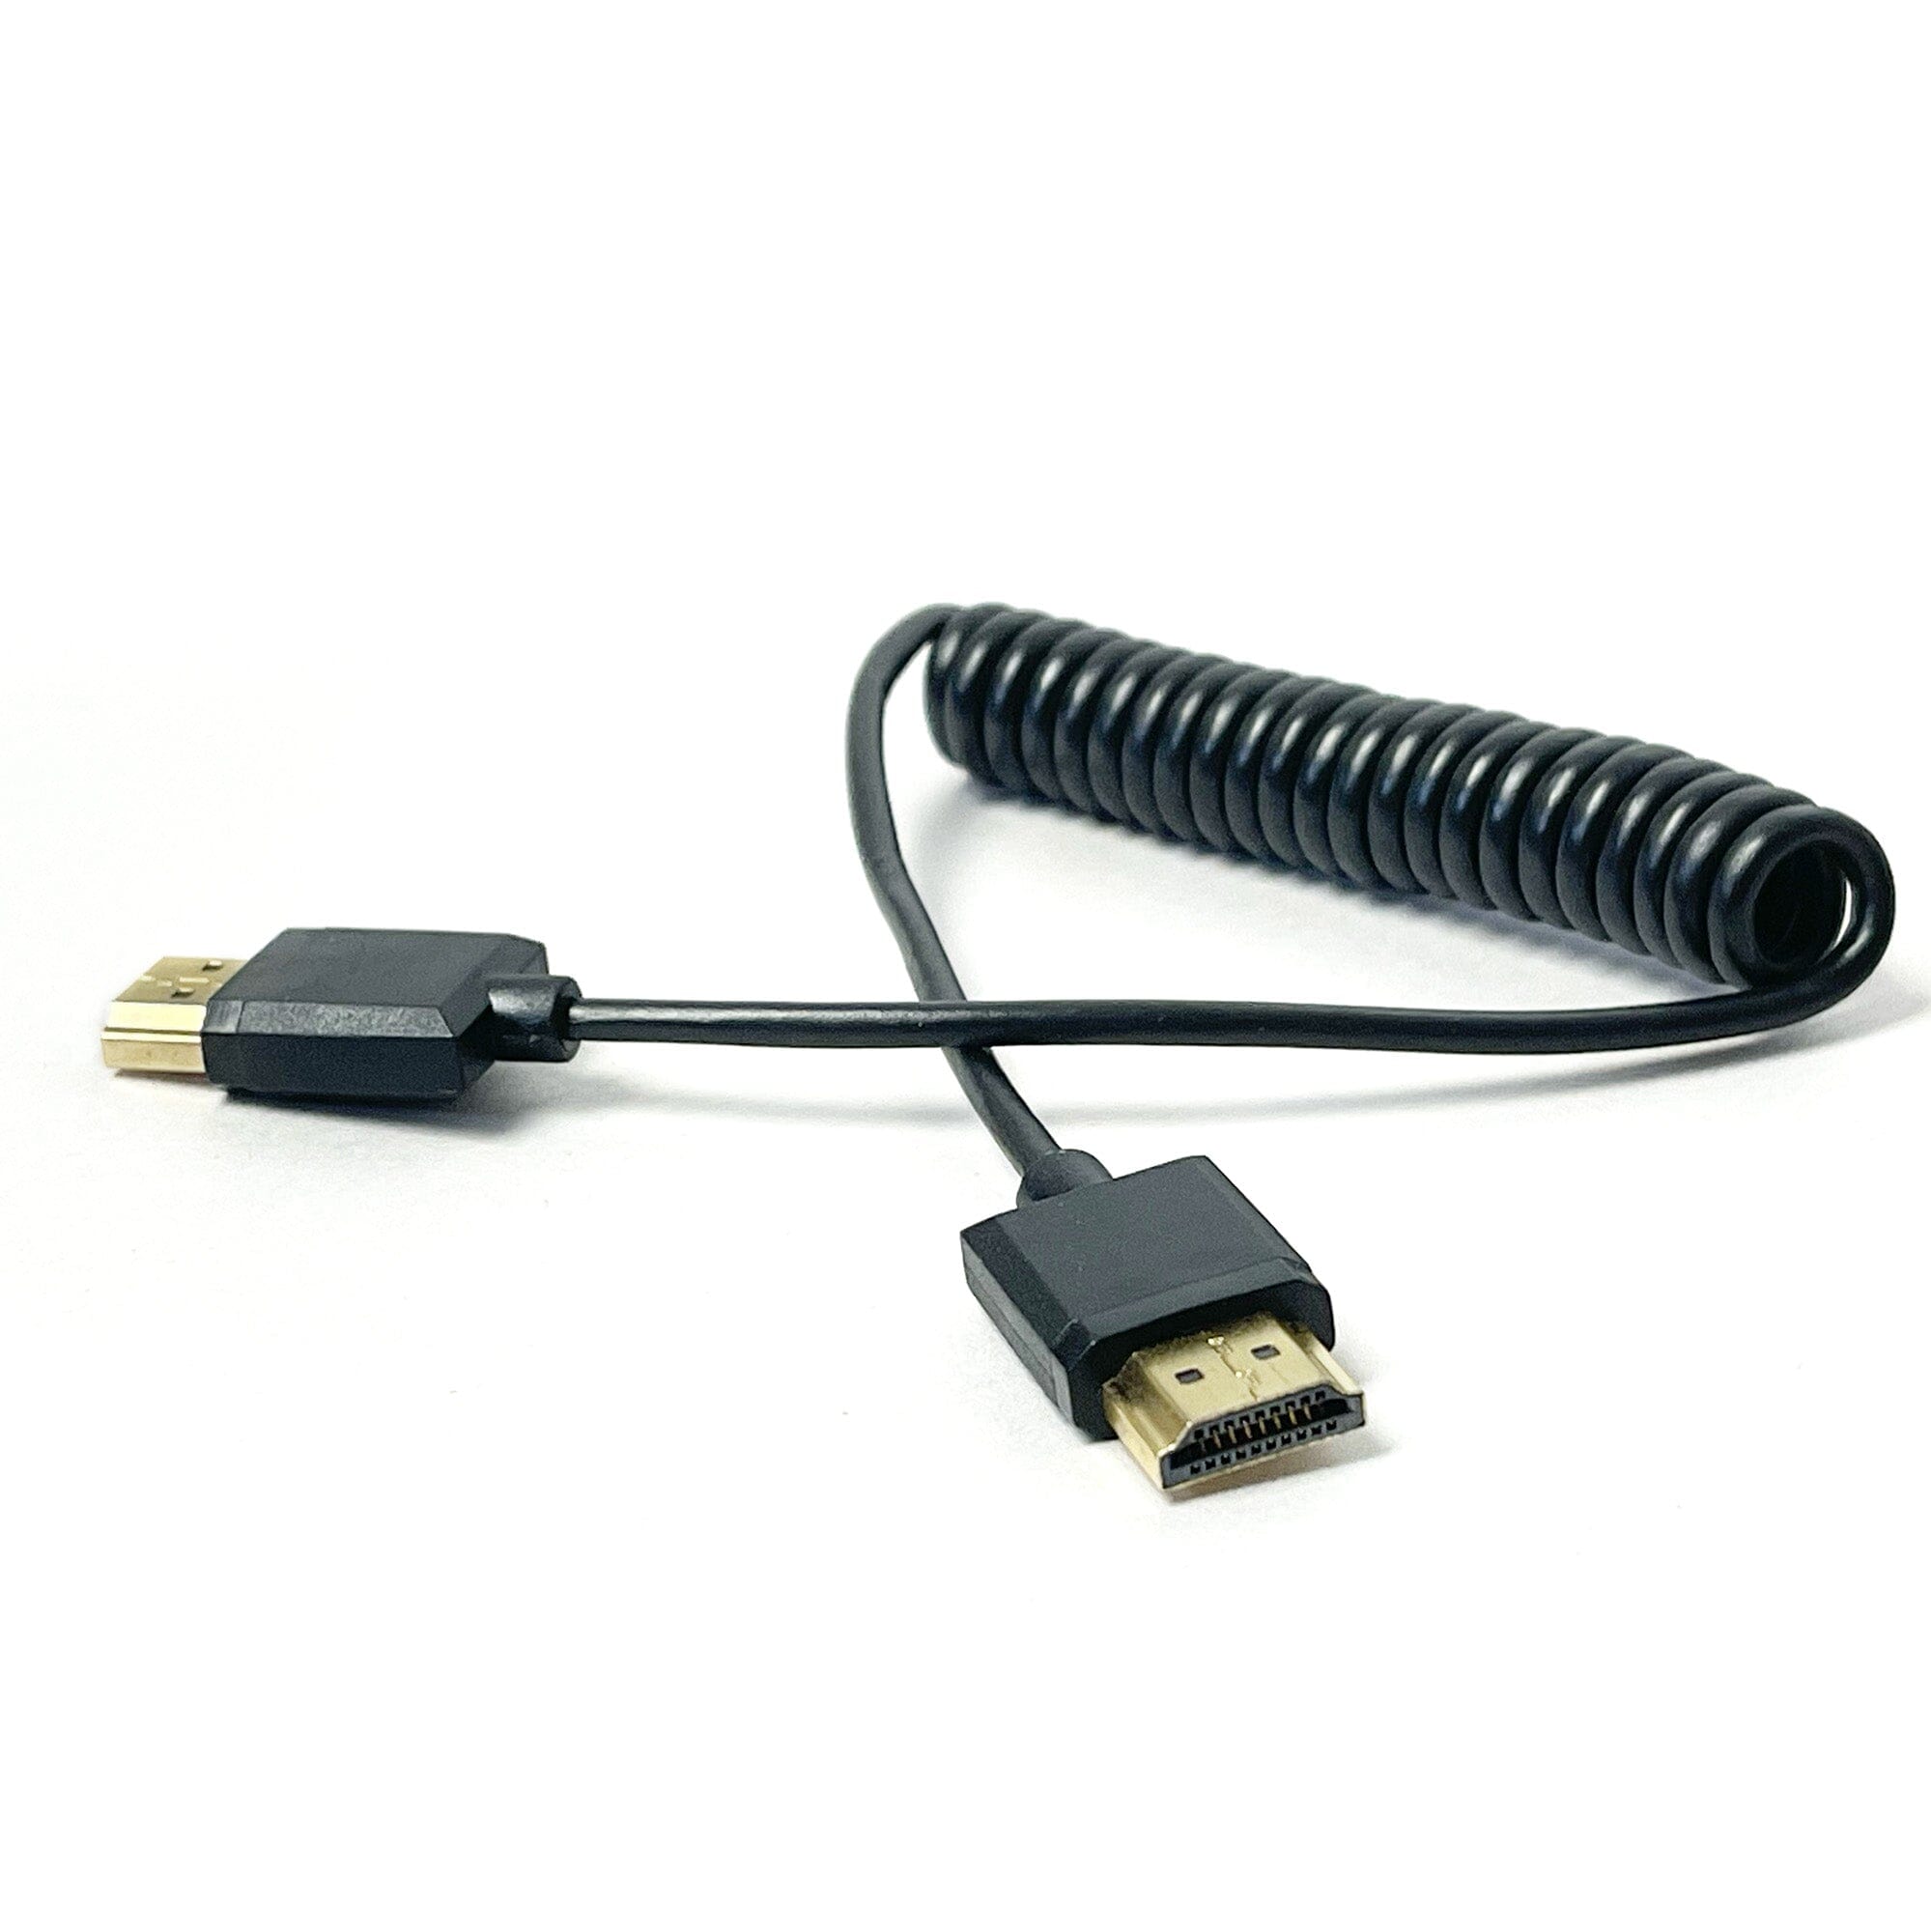 14 in - 4 ft Coiled Full-size HDMI Cable - 4K Standard HDMI (Type A) Full to Full